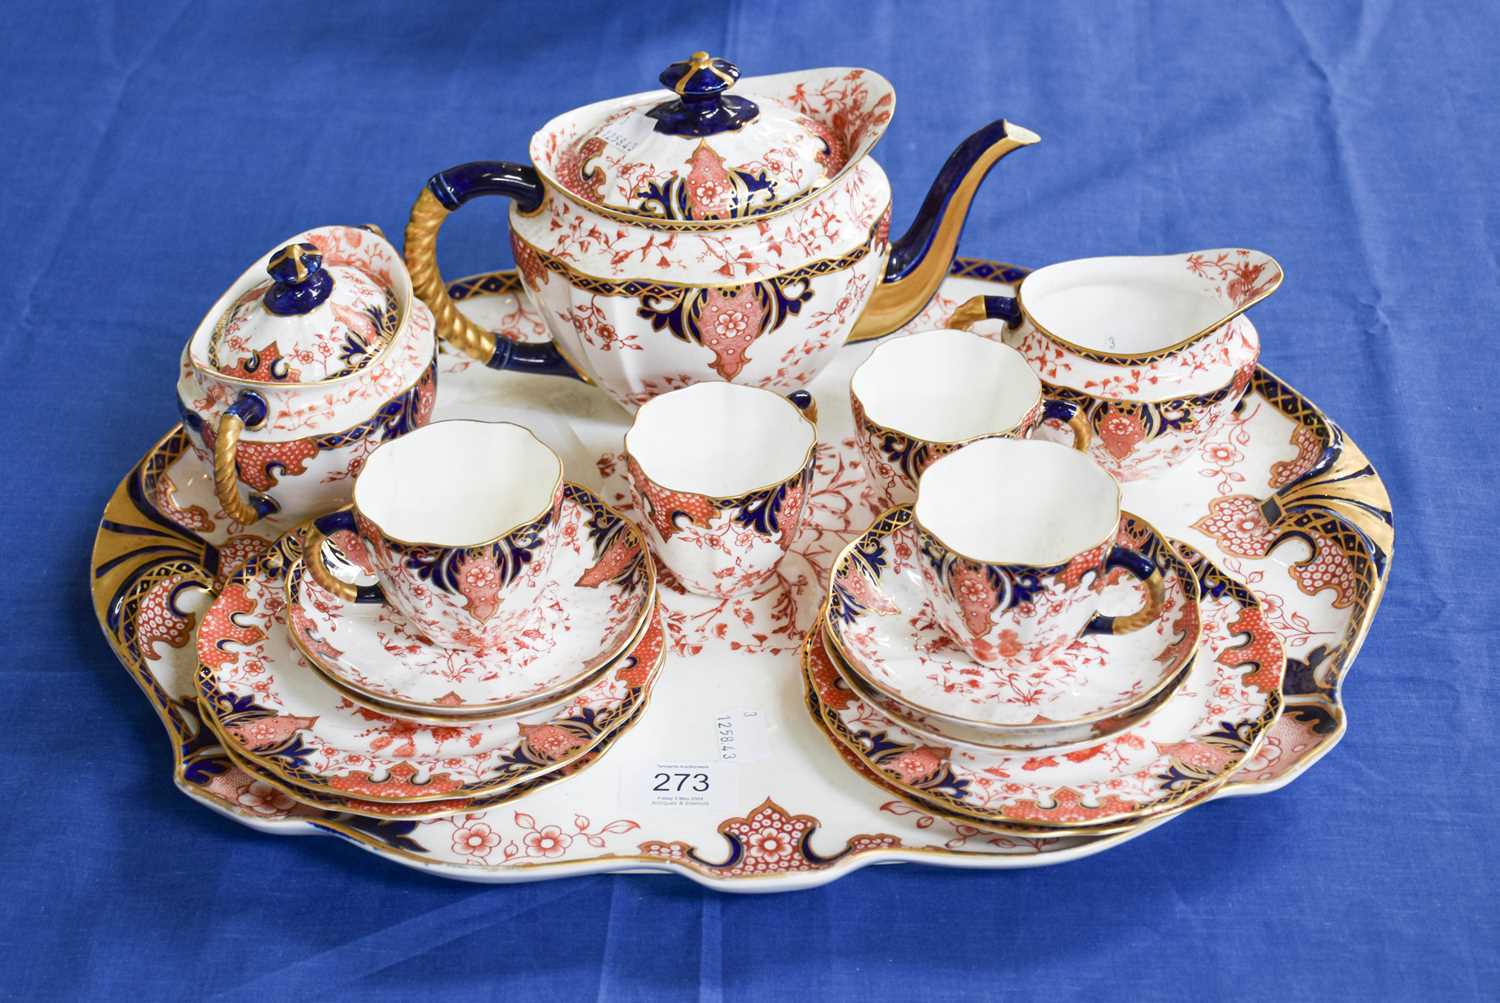 A Royal Crown Derby Porcelain Imari Part Teaset on Cabaret Tray, 1901 and other dates, comprising: